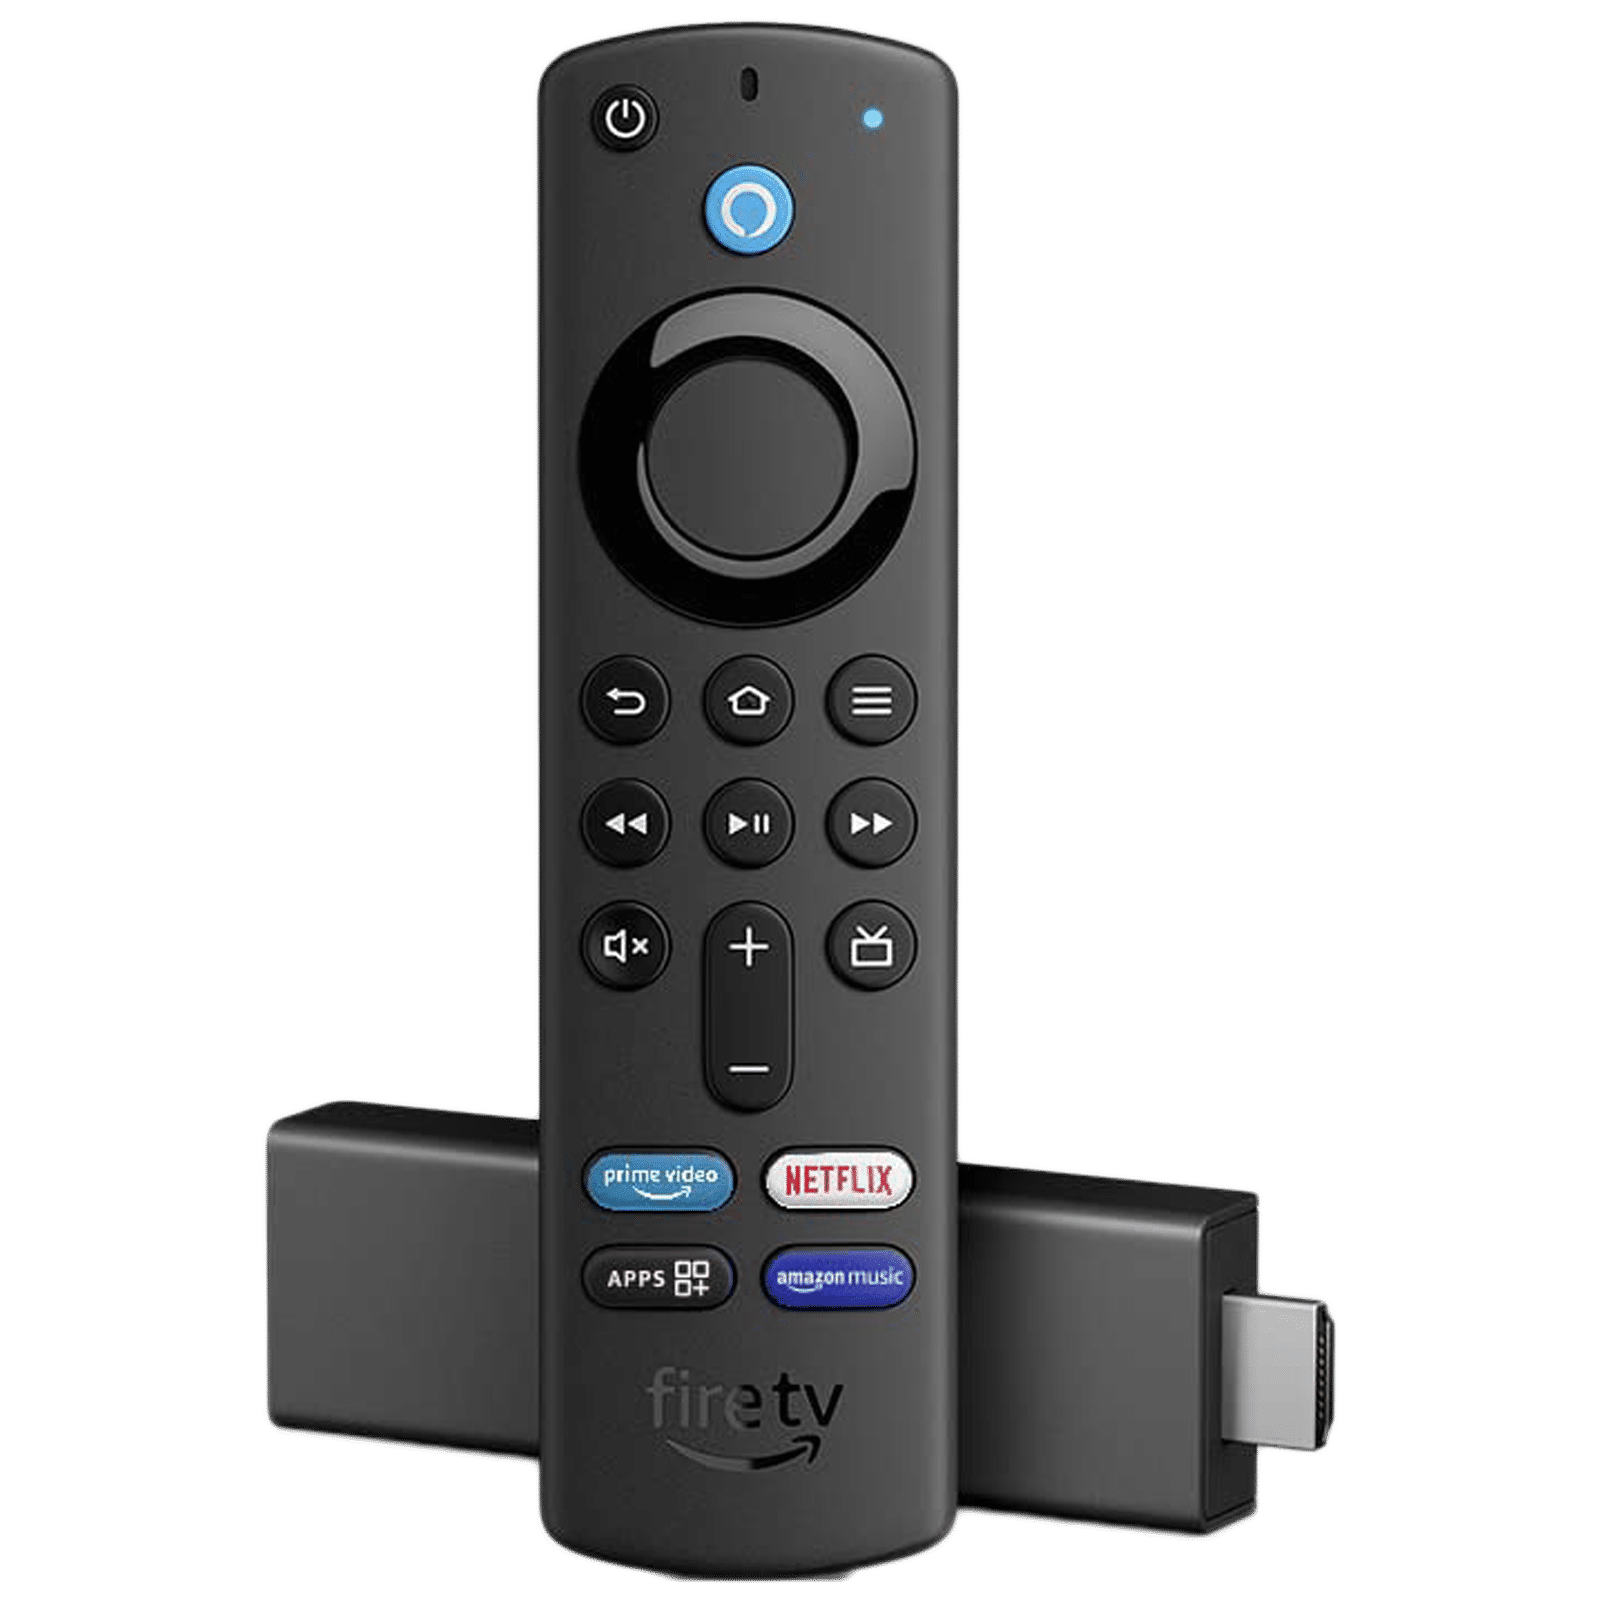 Buy Amazon Fire Tv Stick 4k With Alexa Voice Remote 3rd Gen Dolby Vision And Atmos Support